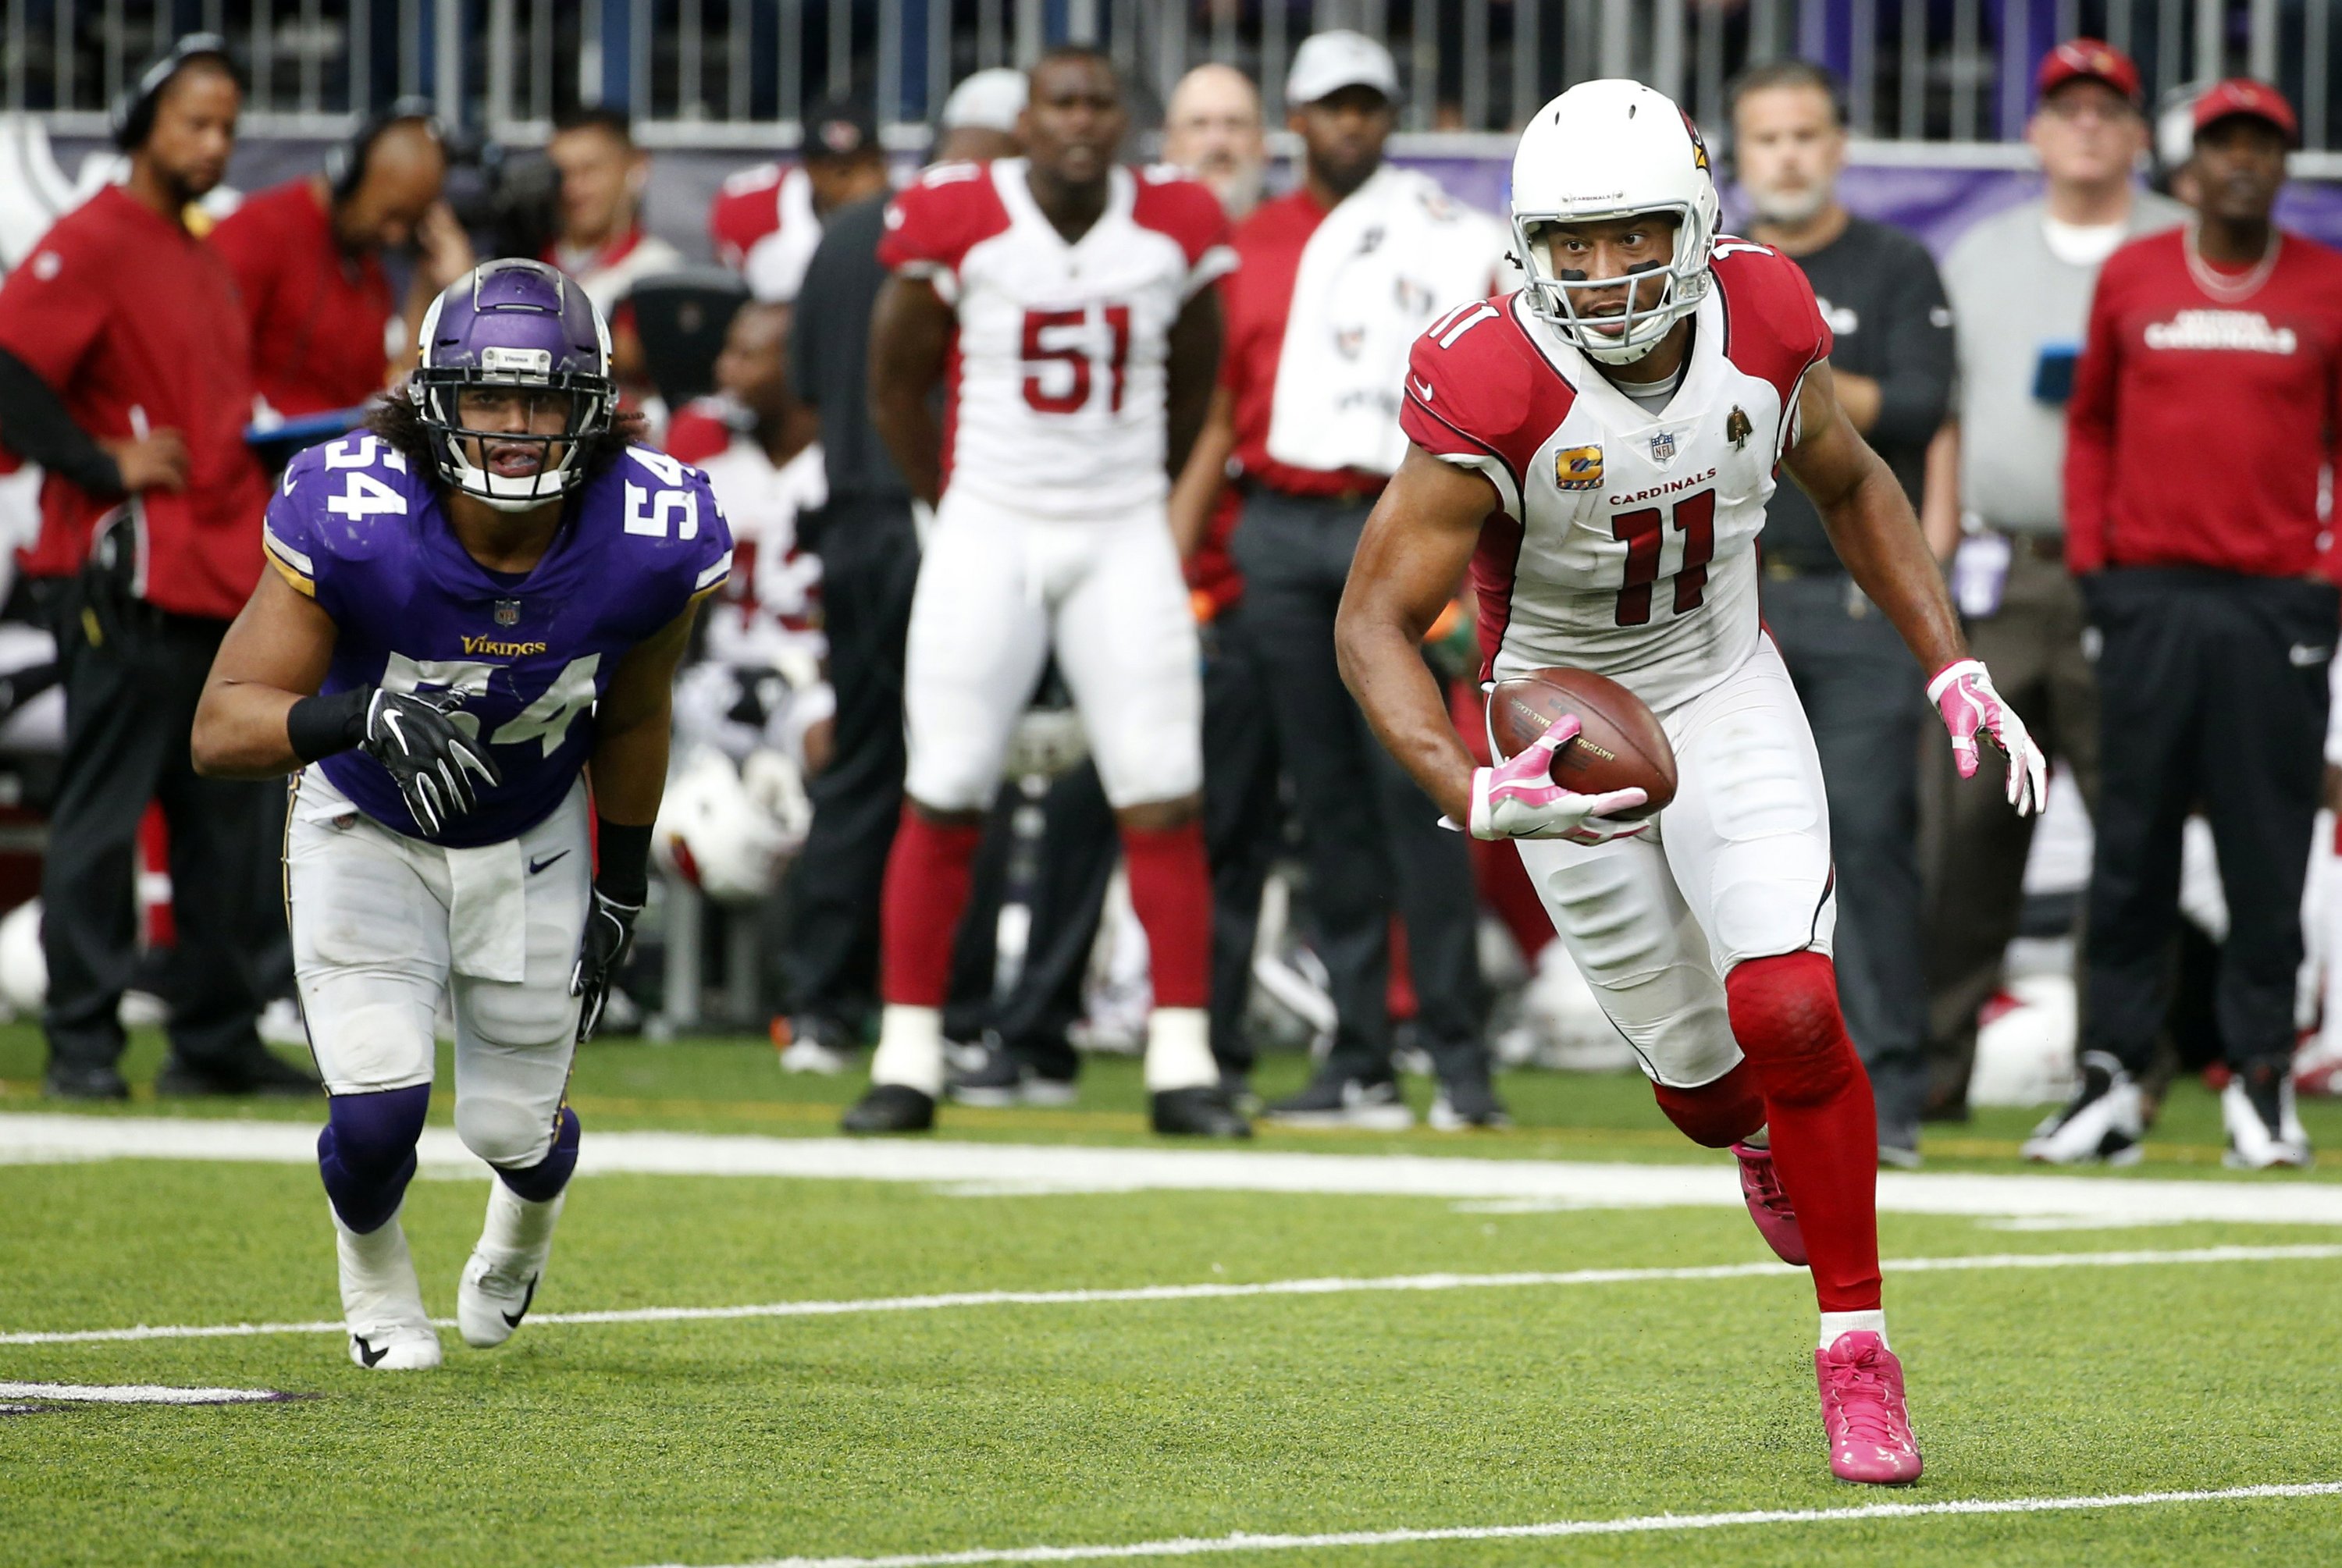 Fitzgerald falls to 0-6 in hometown as Cards lose to Vikes